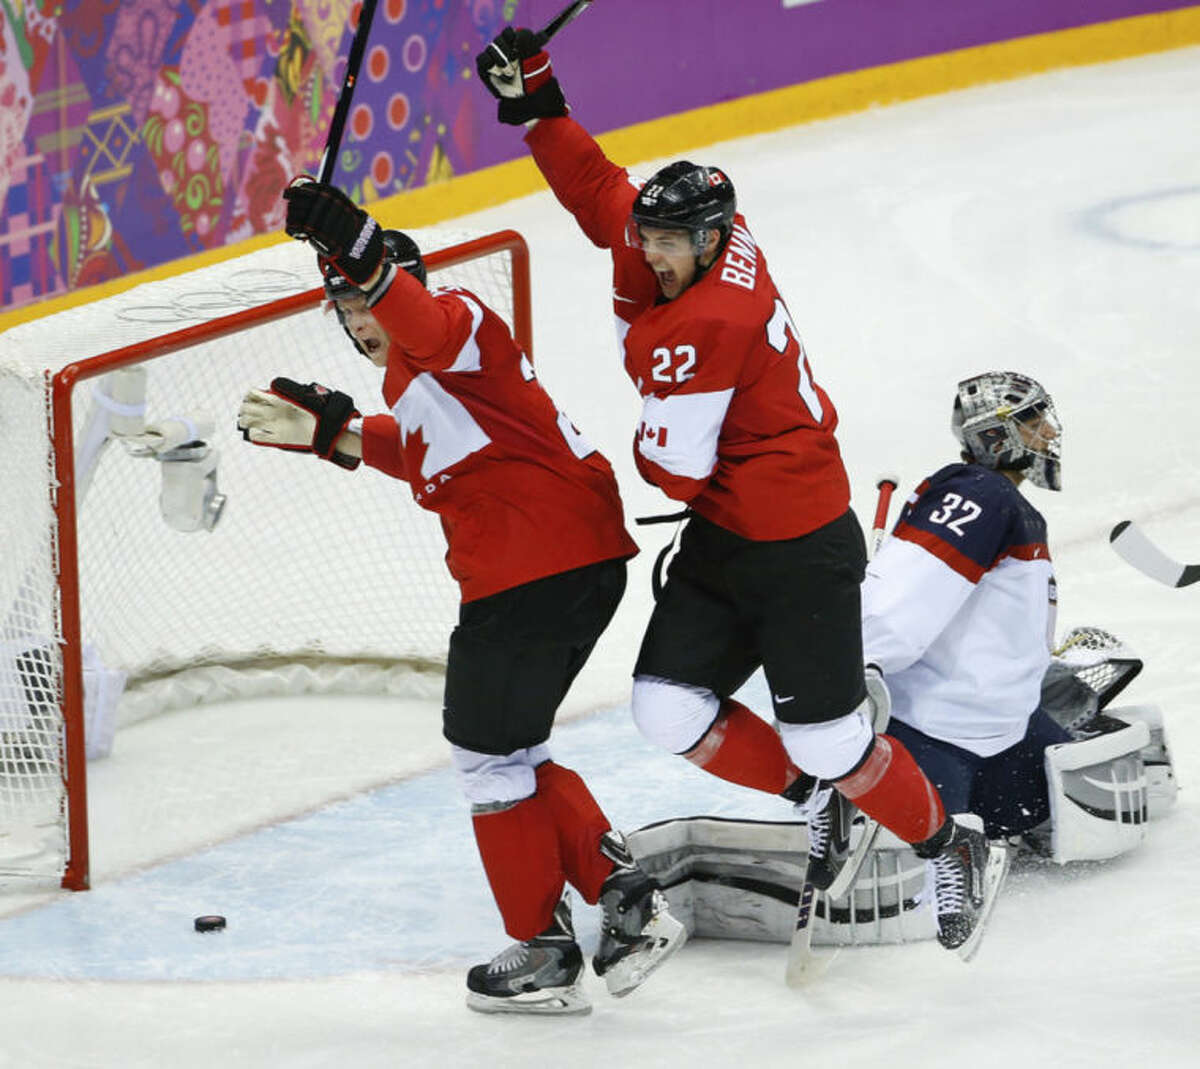 Canada forward Benn Jamie (22) celebrates his goal against USA goaltender Jonathan Quick (32) during the second period of the men's semifinal ice hockey game at the 2014 Winter Olympics, Friday, Feb. 21, 2014, in Sochi, Russia. (AP Photo/Matt Slocum)